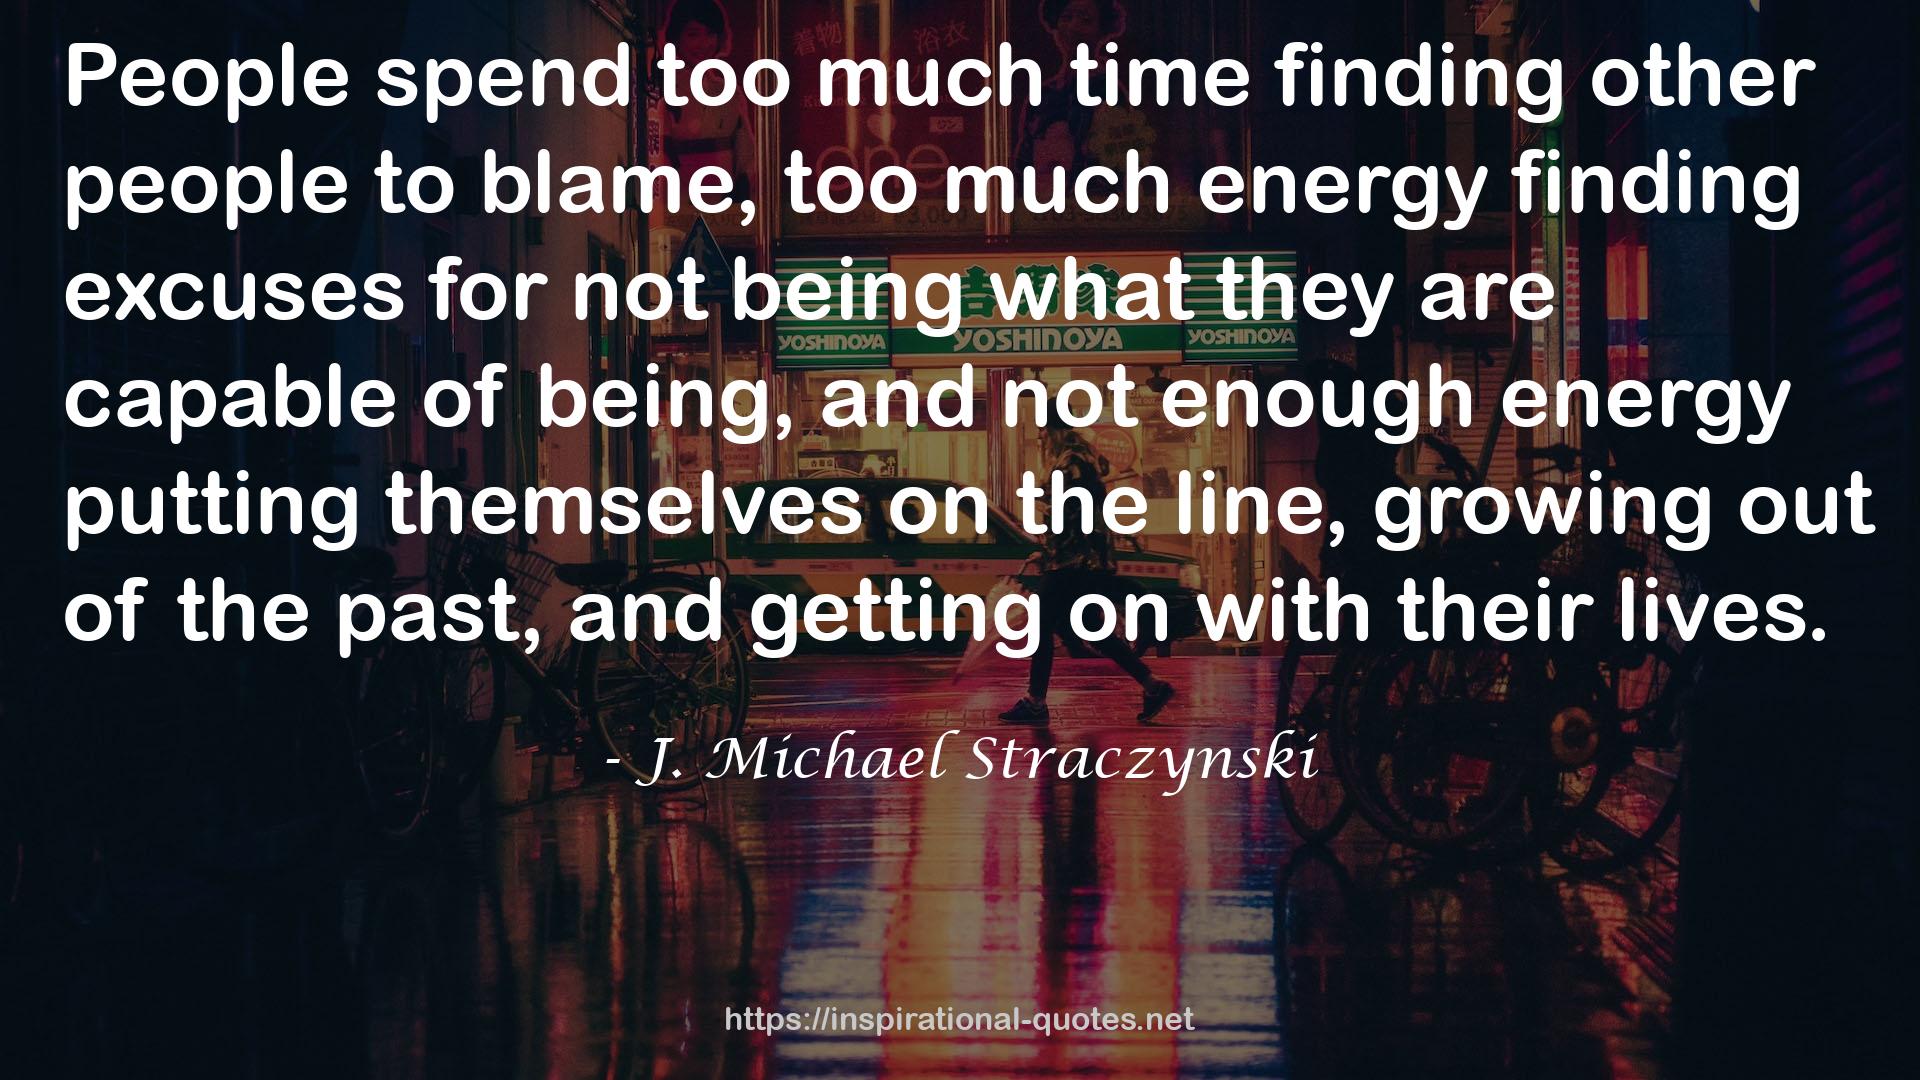 too much energy finding excuses  QUOTES